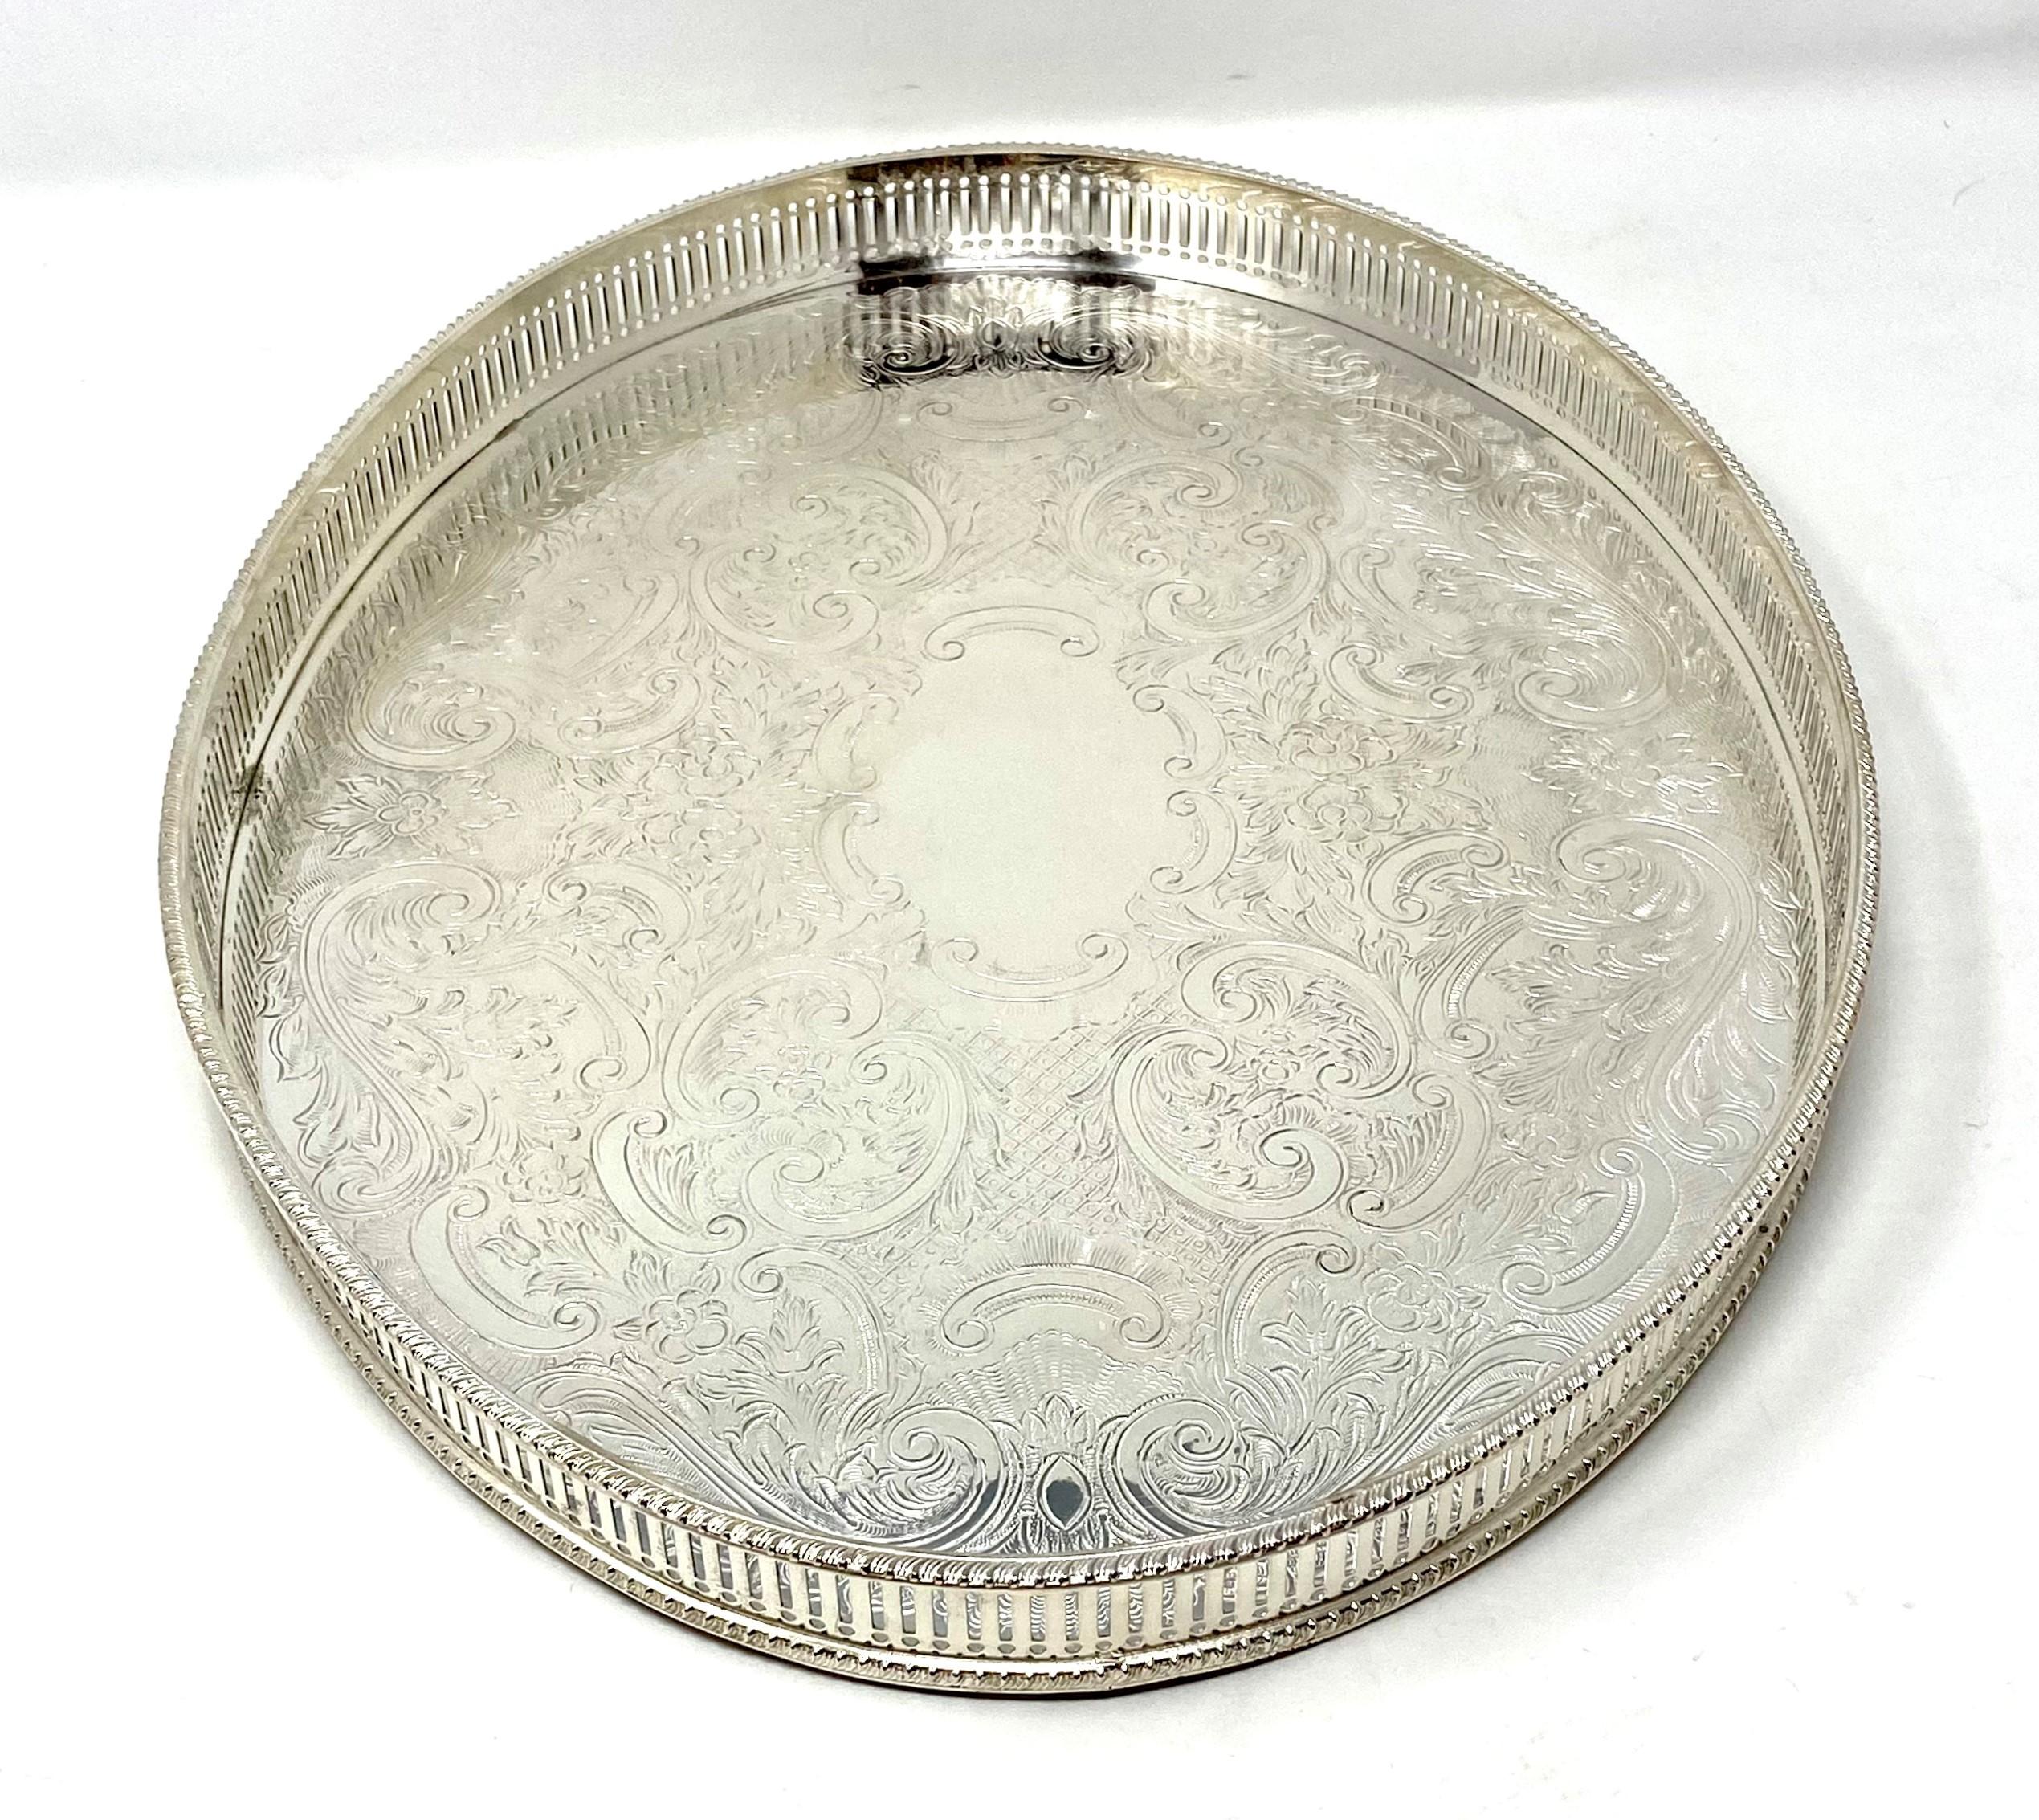 Finely engraved handmade English silver plated footed oval tray with gallery.